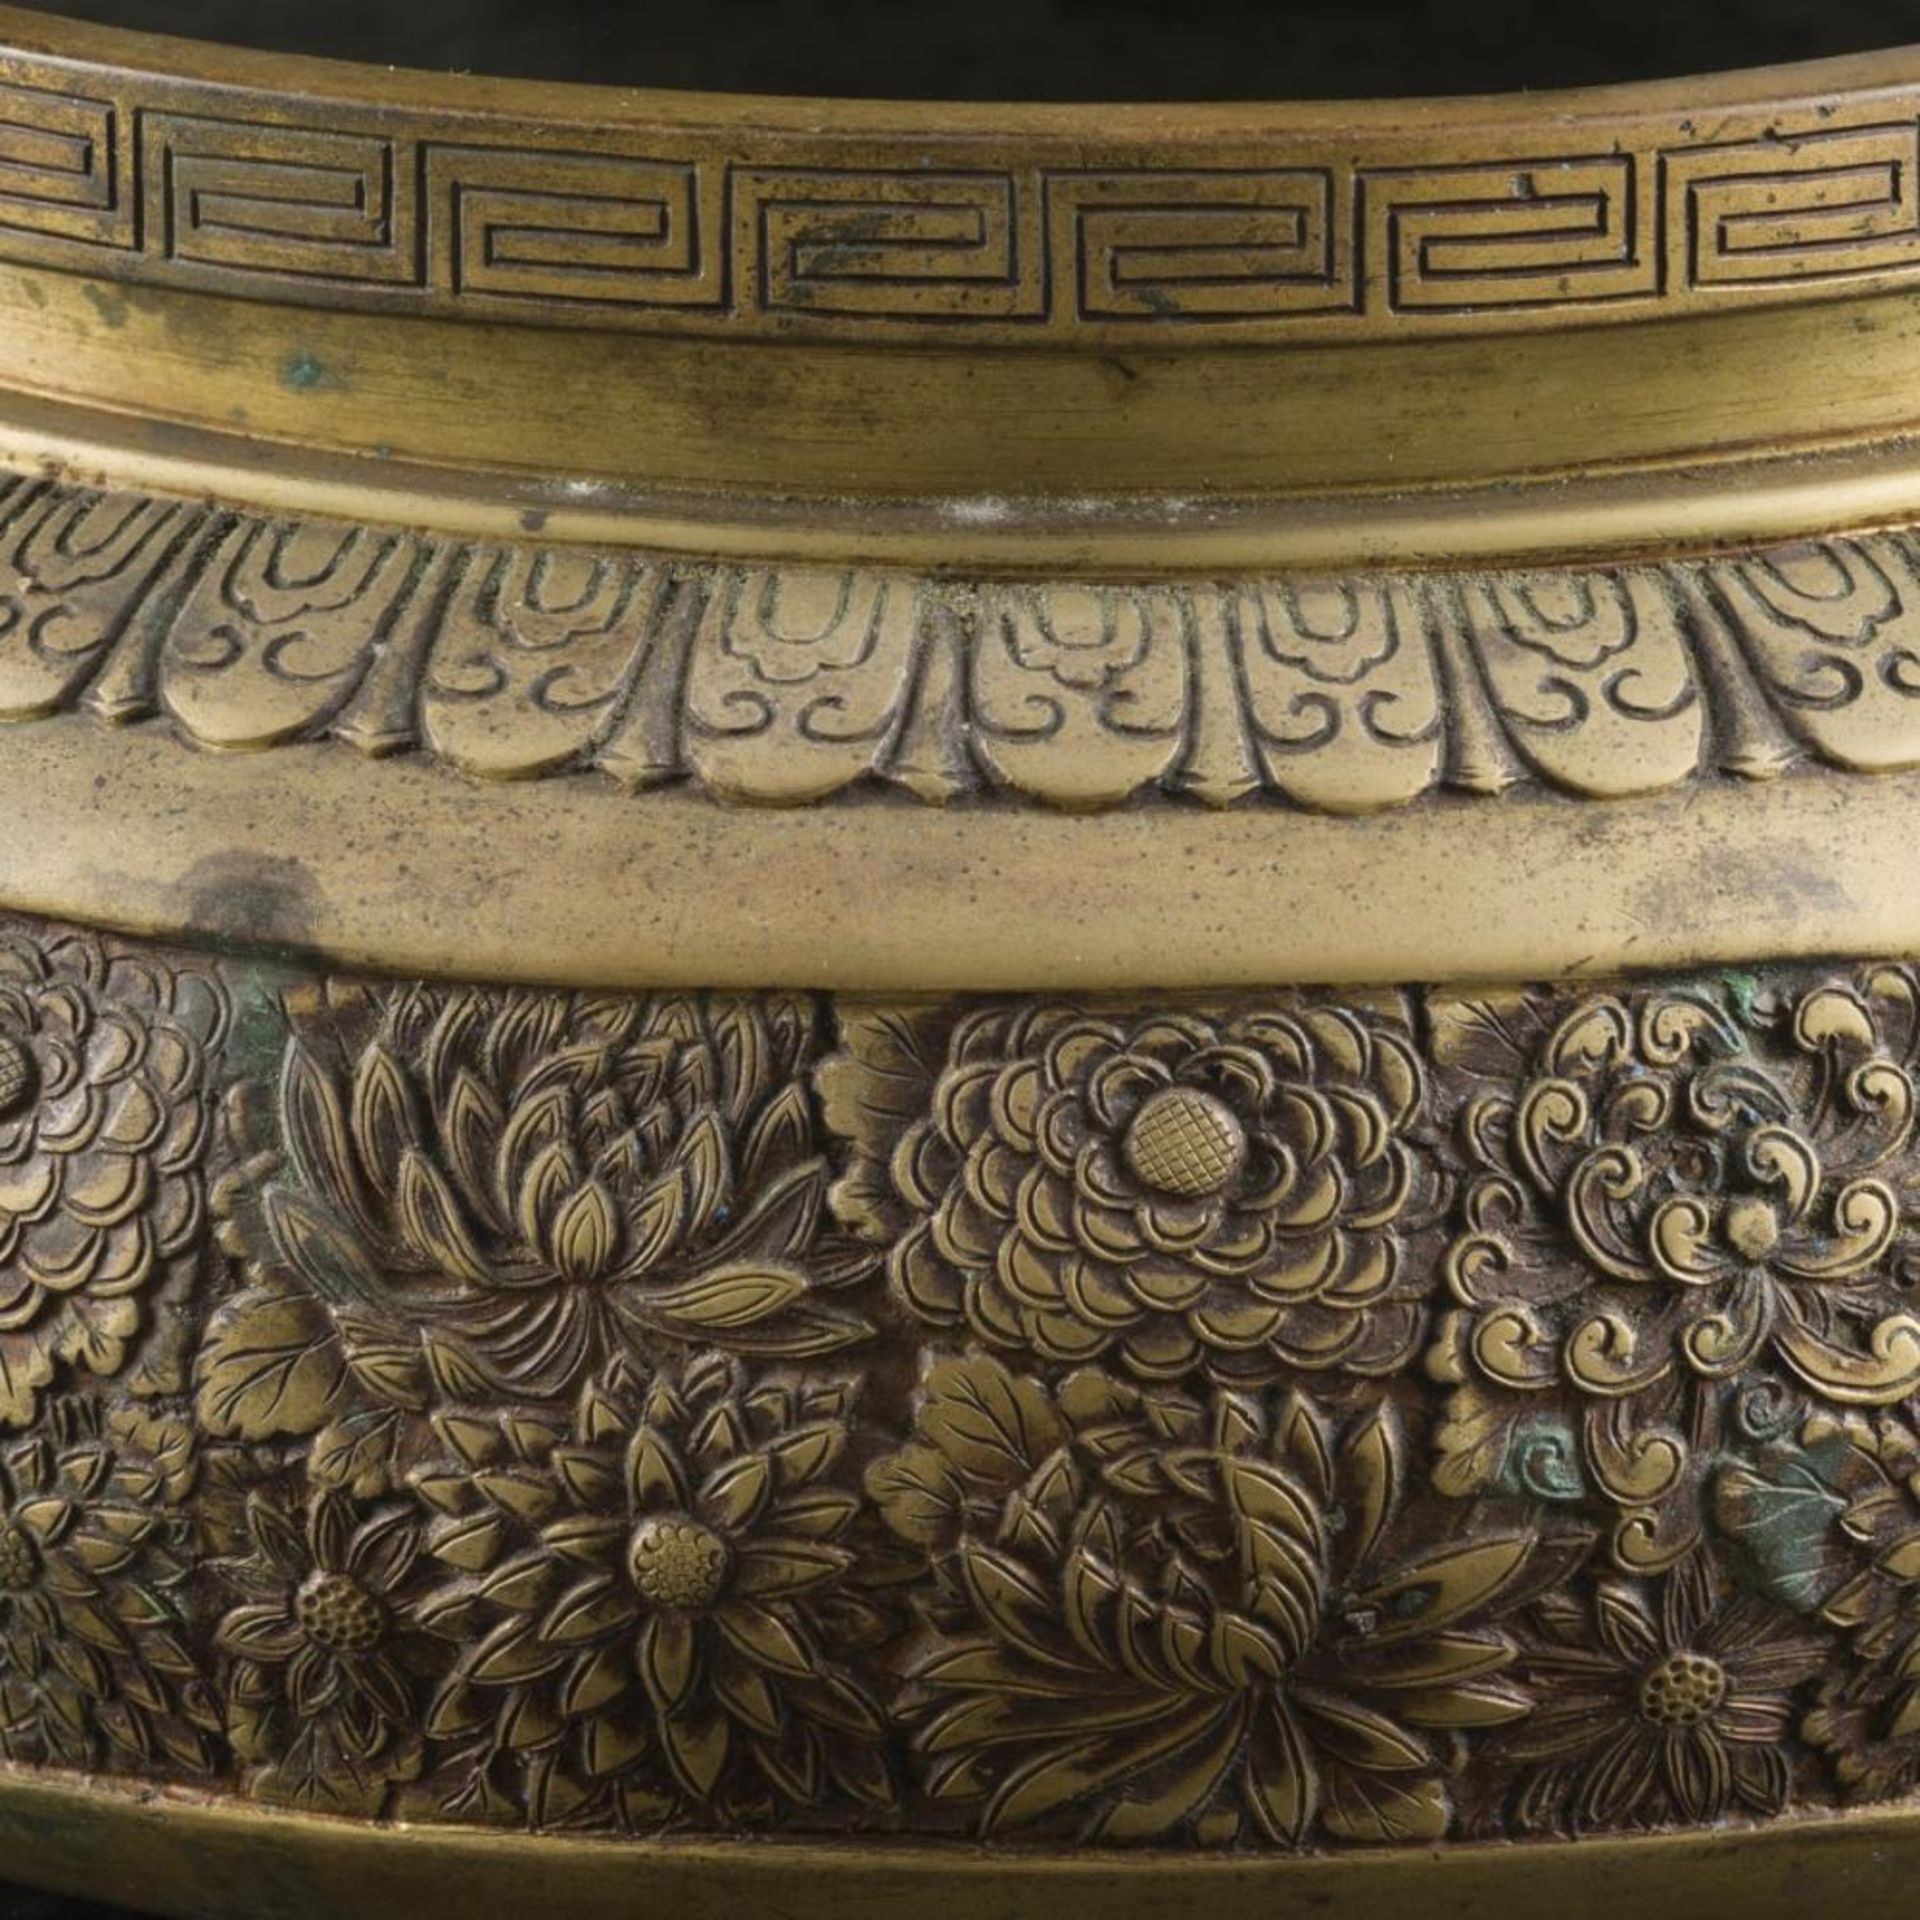 A bronze part of an incence burner, Koro, China, 20th century. - Image 3 of 5